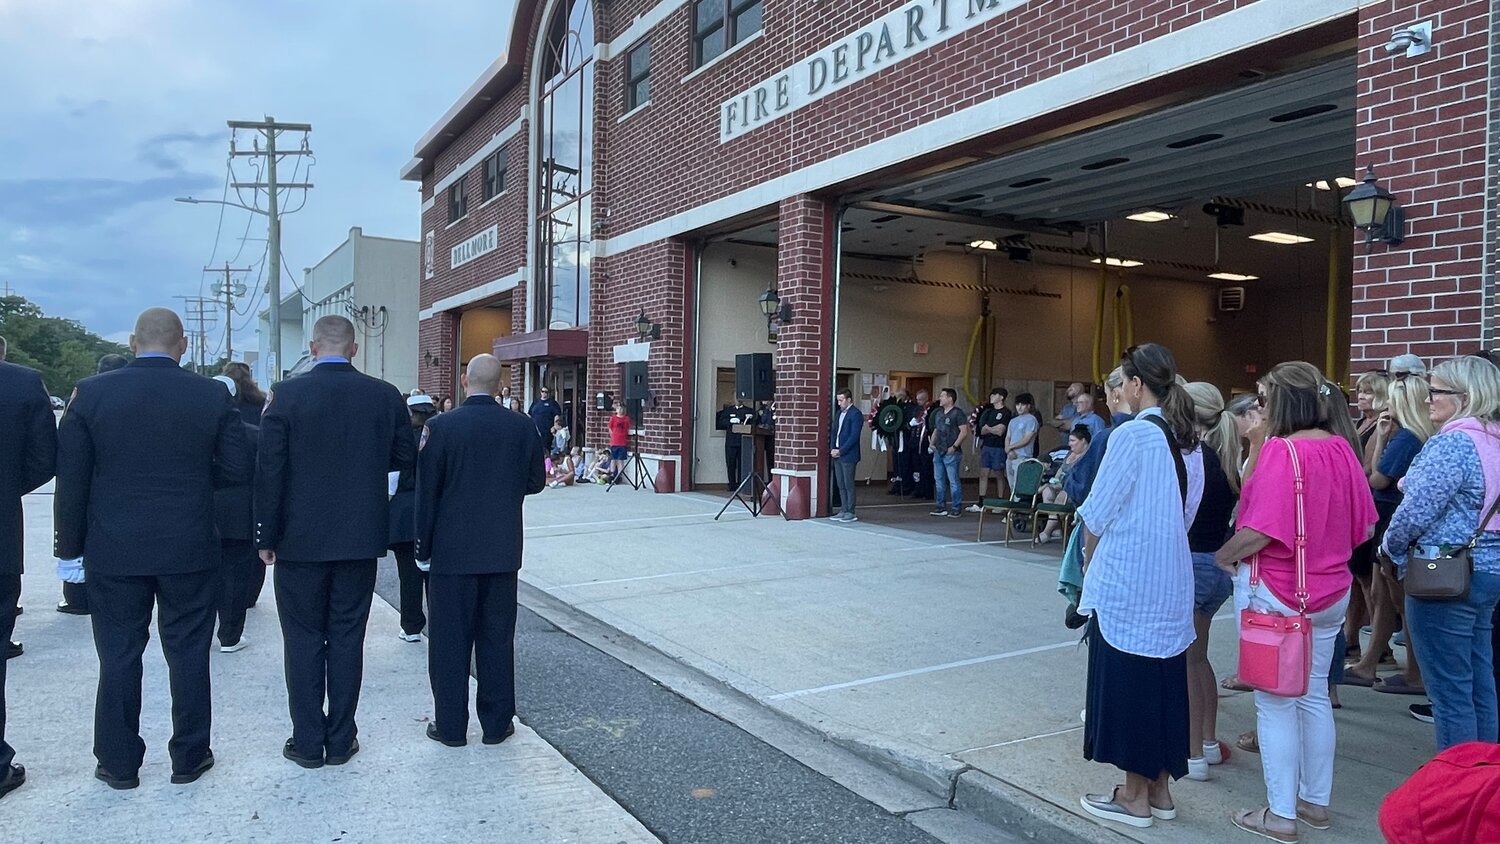 Fire department personnel and community members gathered inside and outside of Bellmore’s department, to commemorate the 22nd anniversary or Sept. 11.